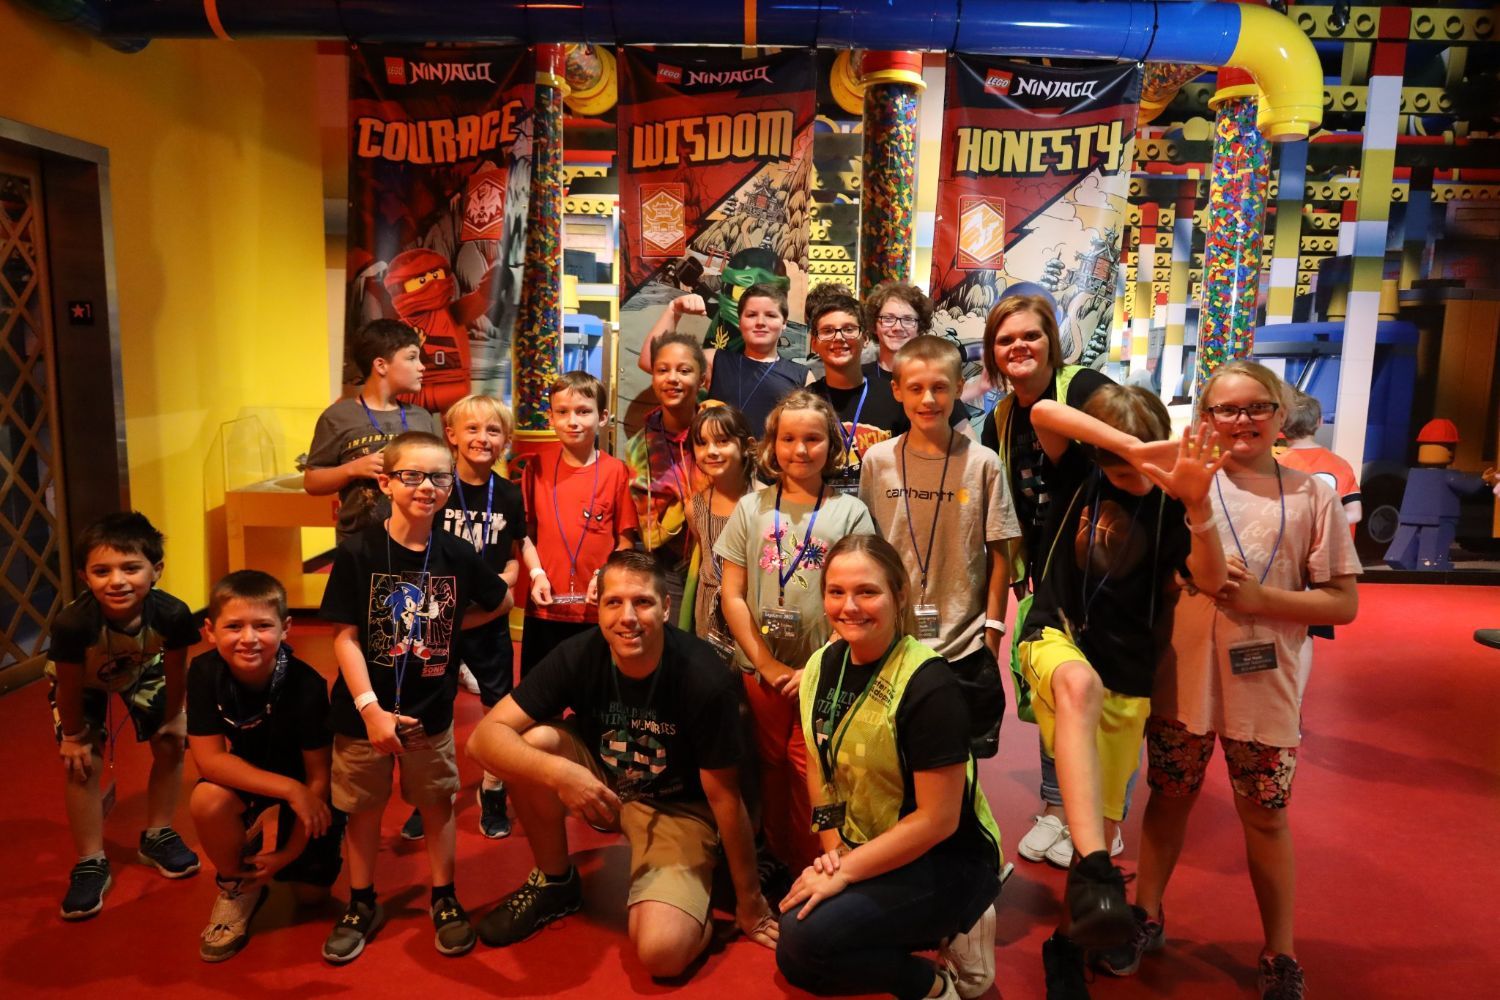 Our Respite team with the youth at Legoland